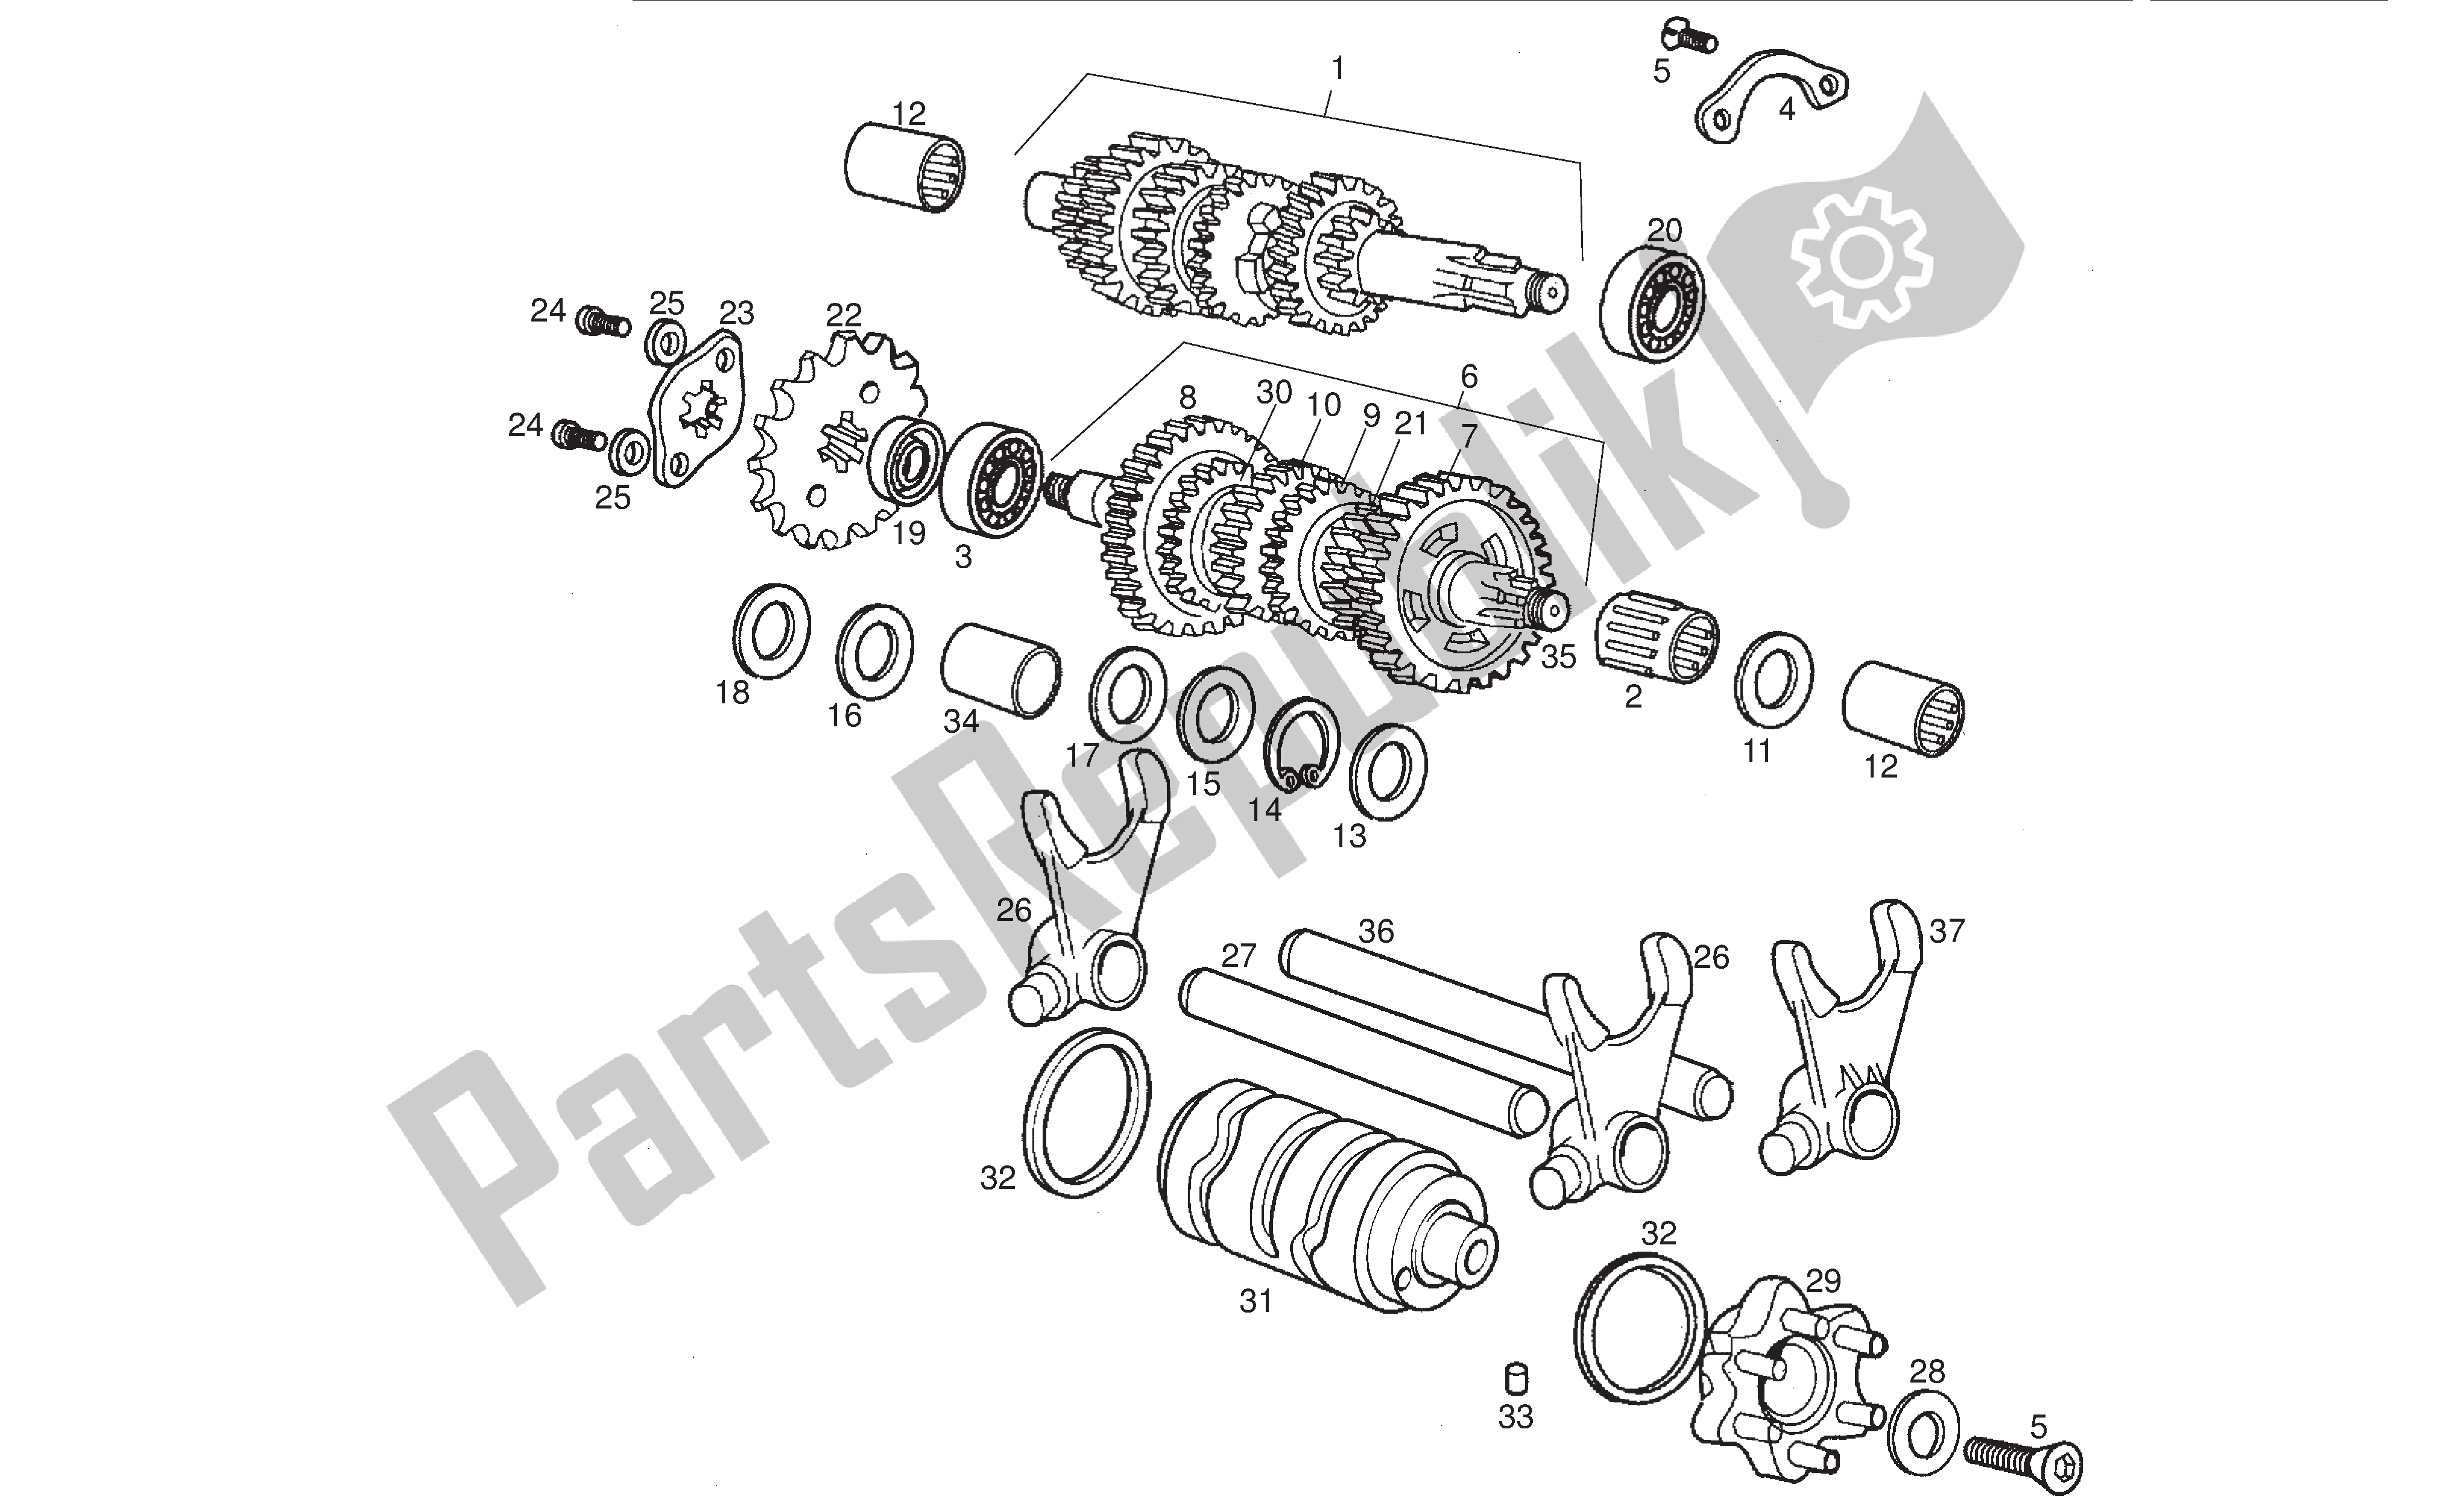 All parts for the Driveshaft of the Derbi Senda DRD SM 50 2005 - 2008